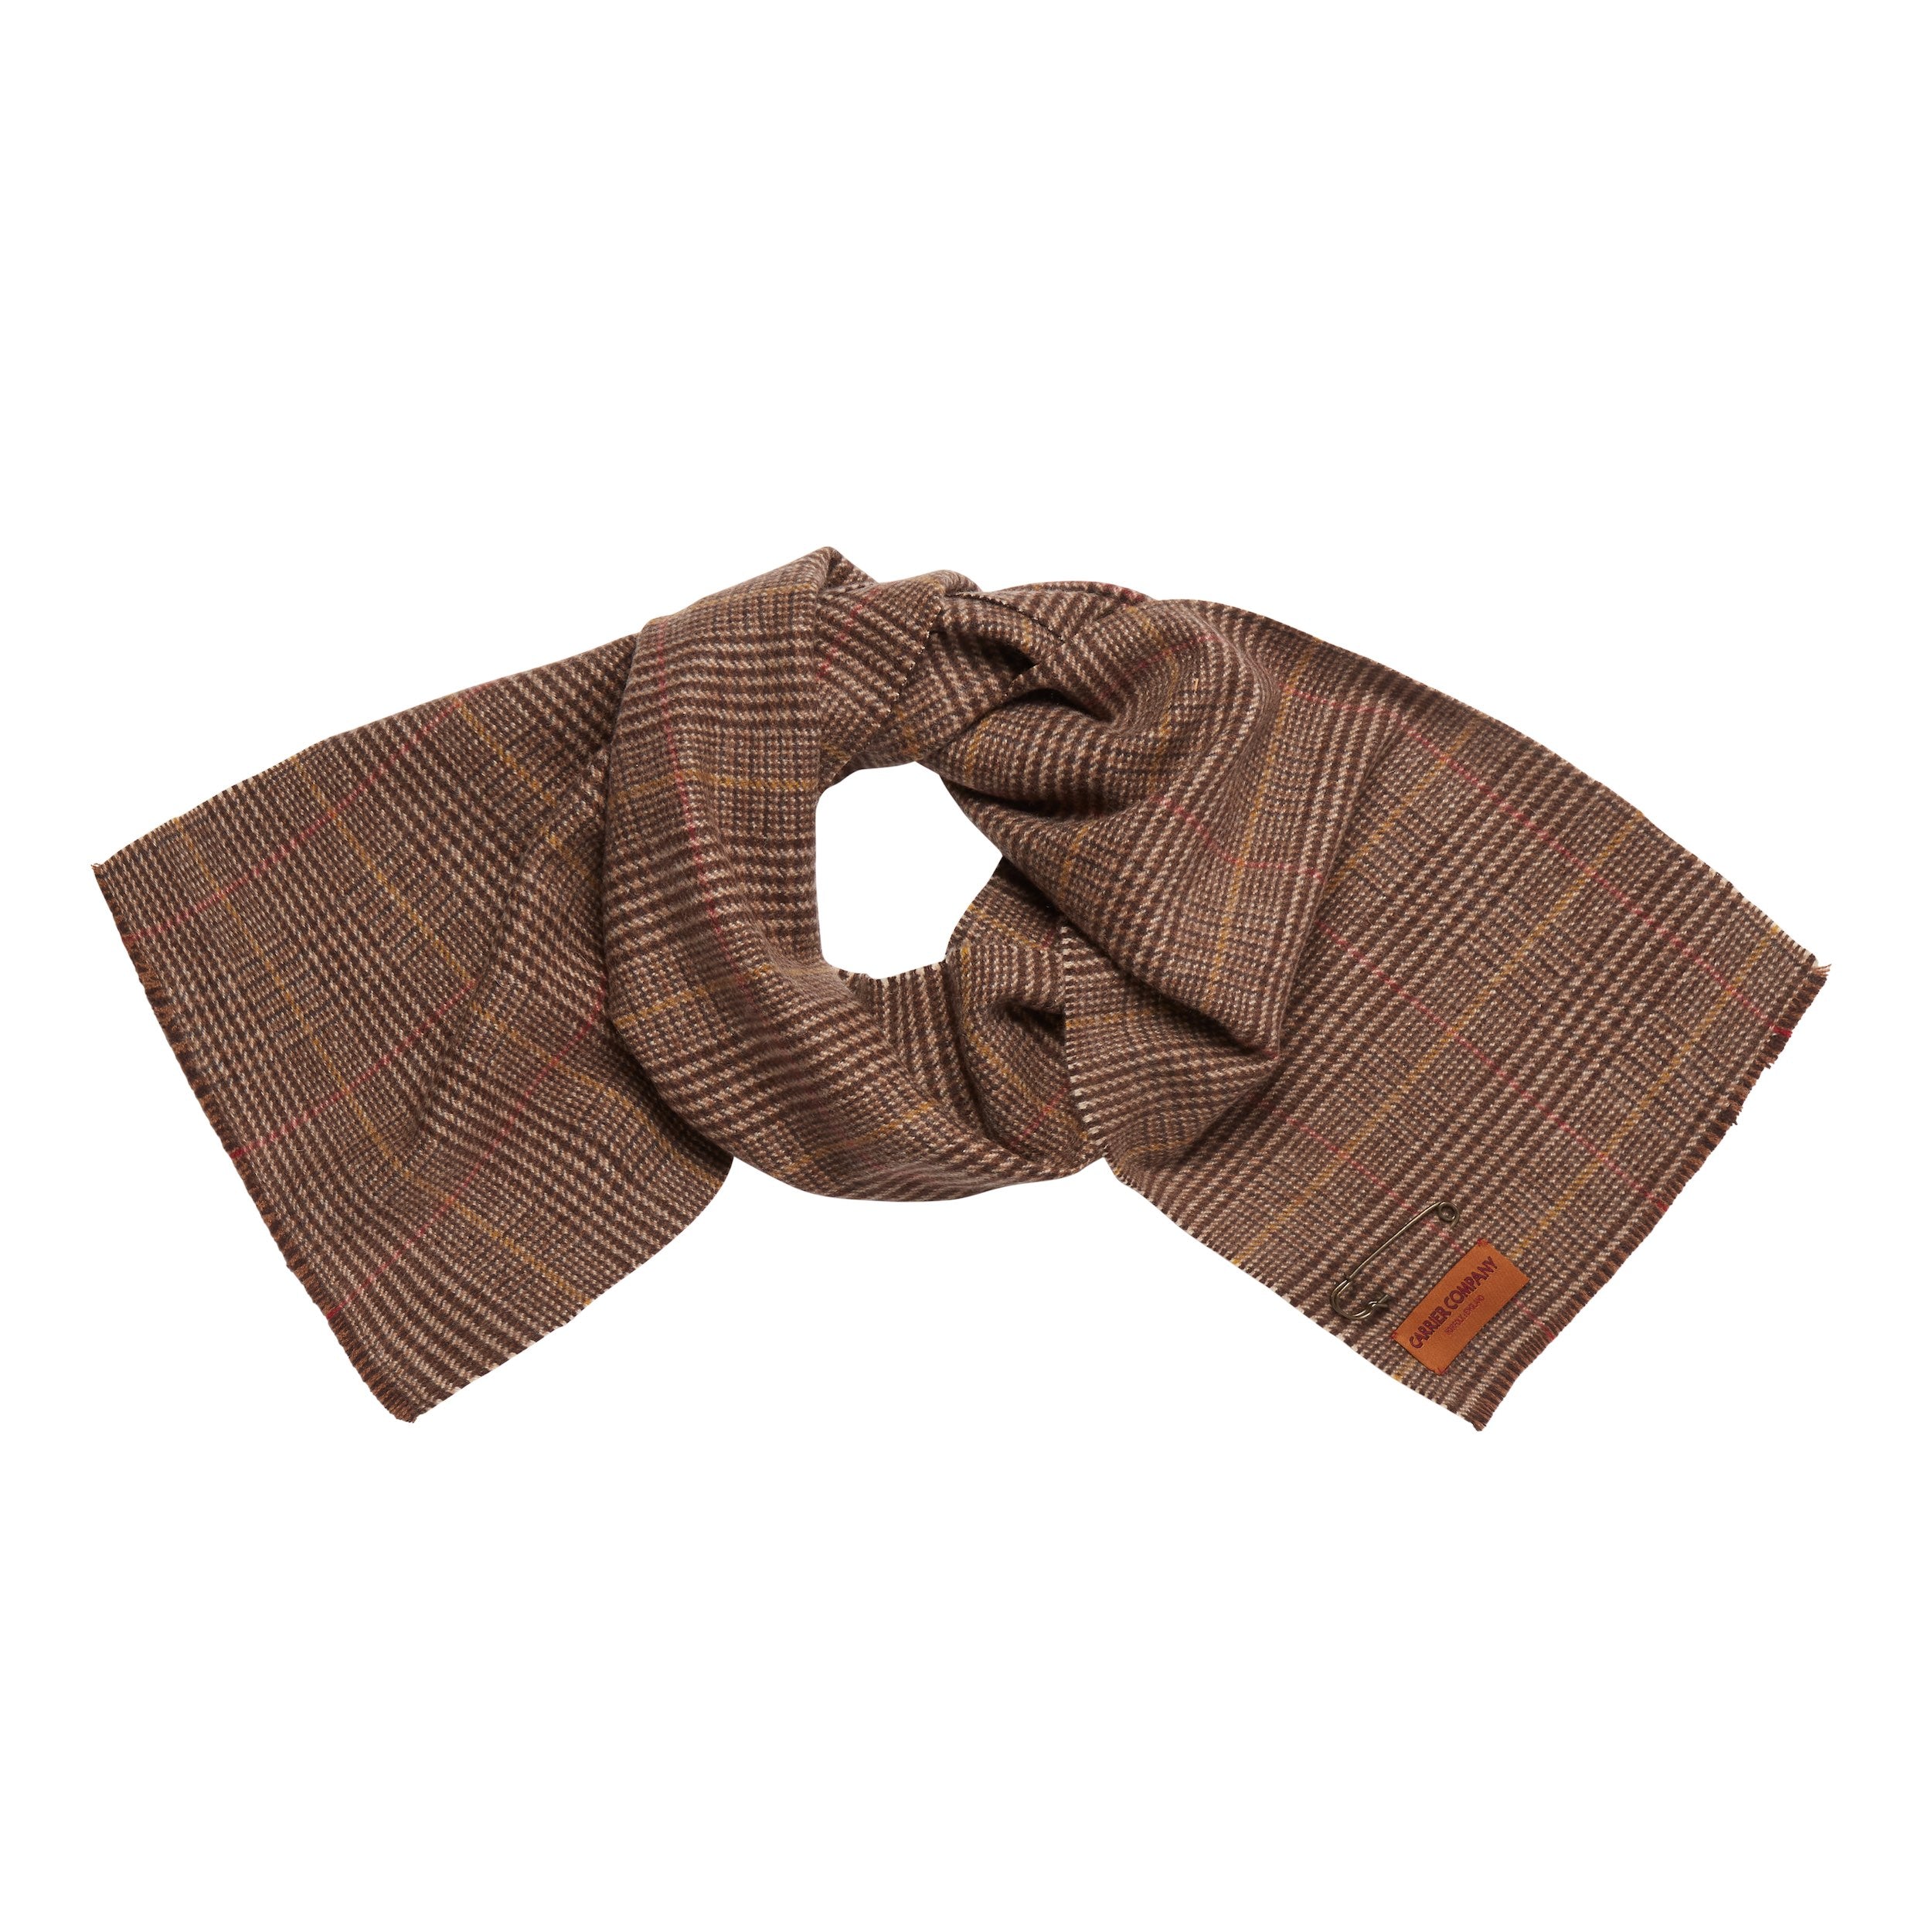 Carrier Company Cashmere Short Scarf in Gold Houndstooth